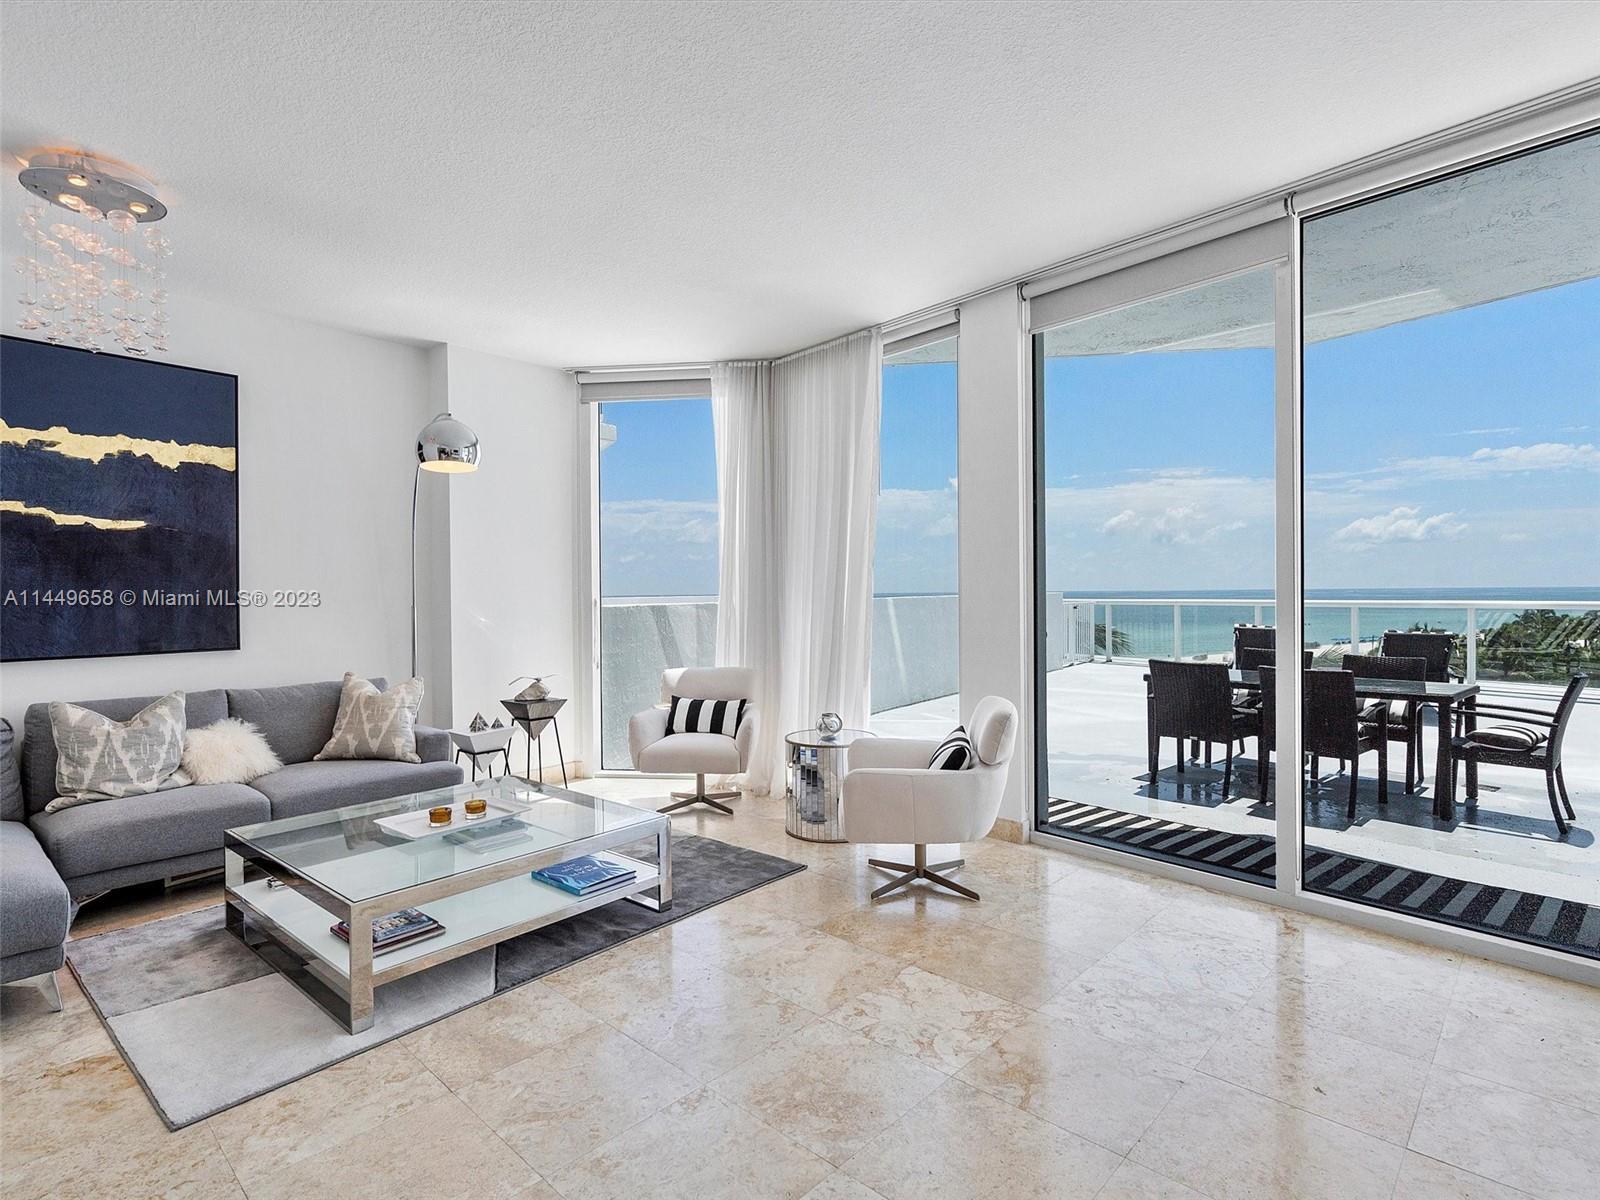 Exquisitely furnished unit with unobstructed oceanfront views, spacious open floor concept kitchen a